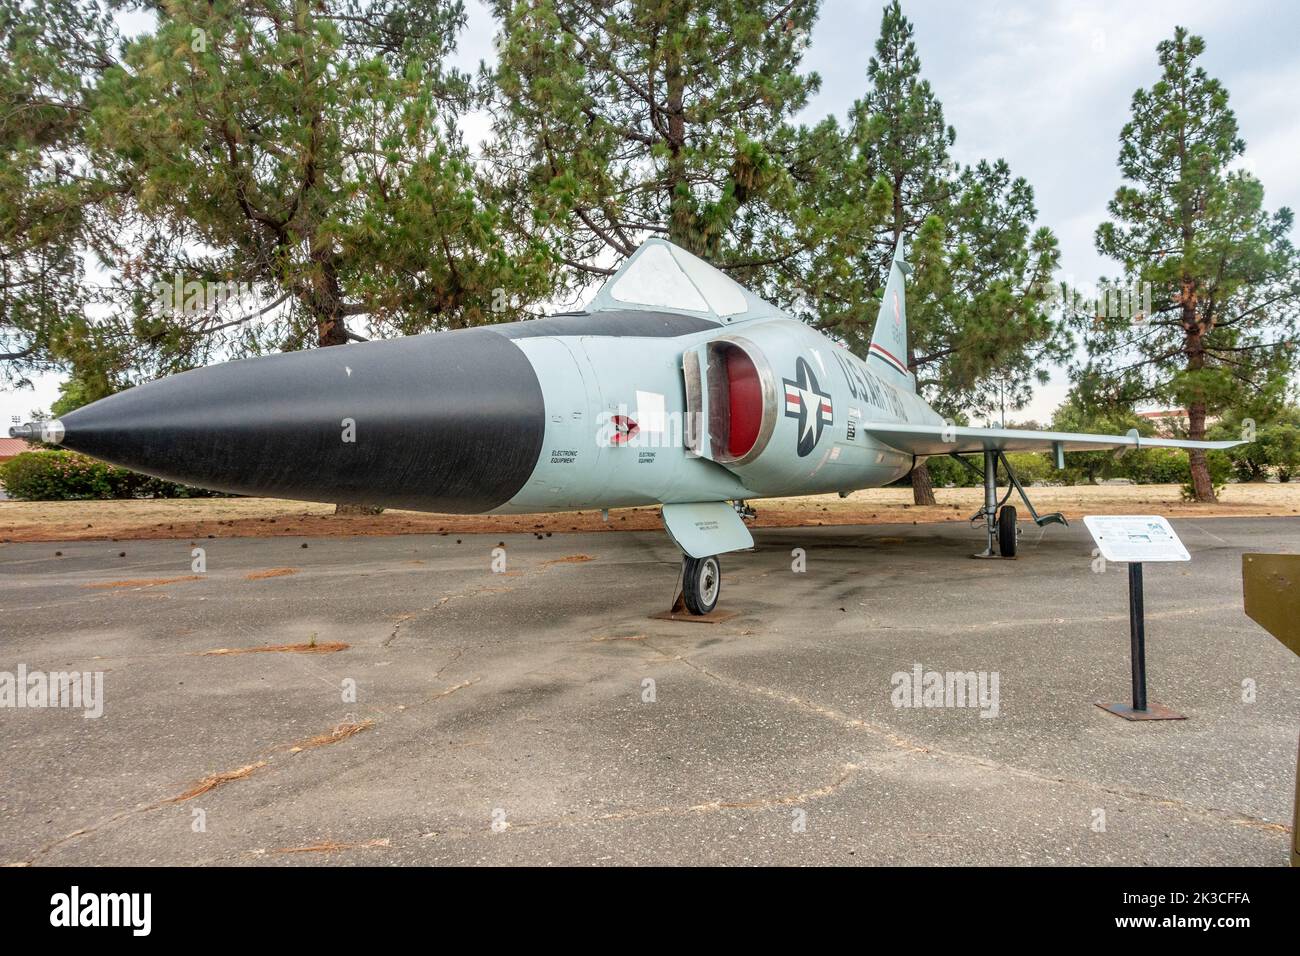 A Convair F-102 Delta Dagger interceptor aircraft on display at The Travis Airforce Base in California, USA Stock Photo